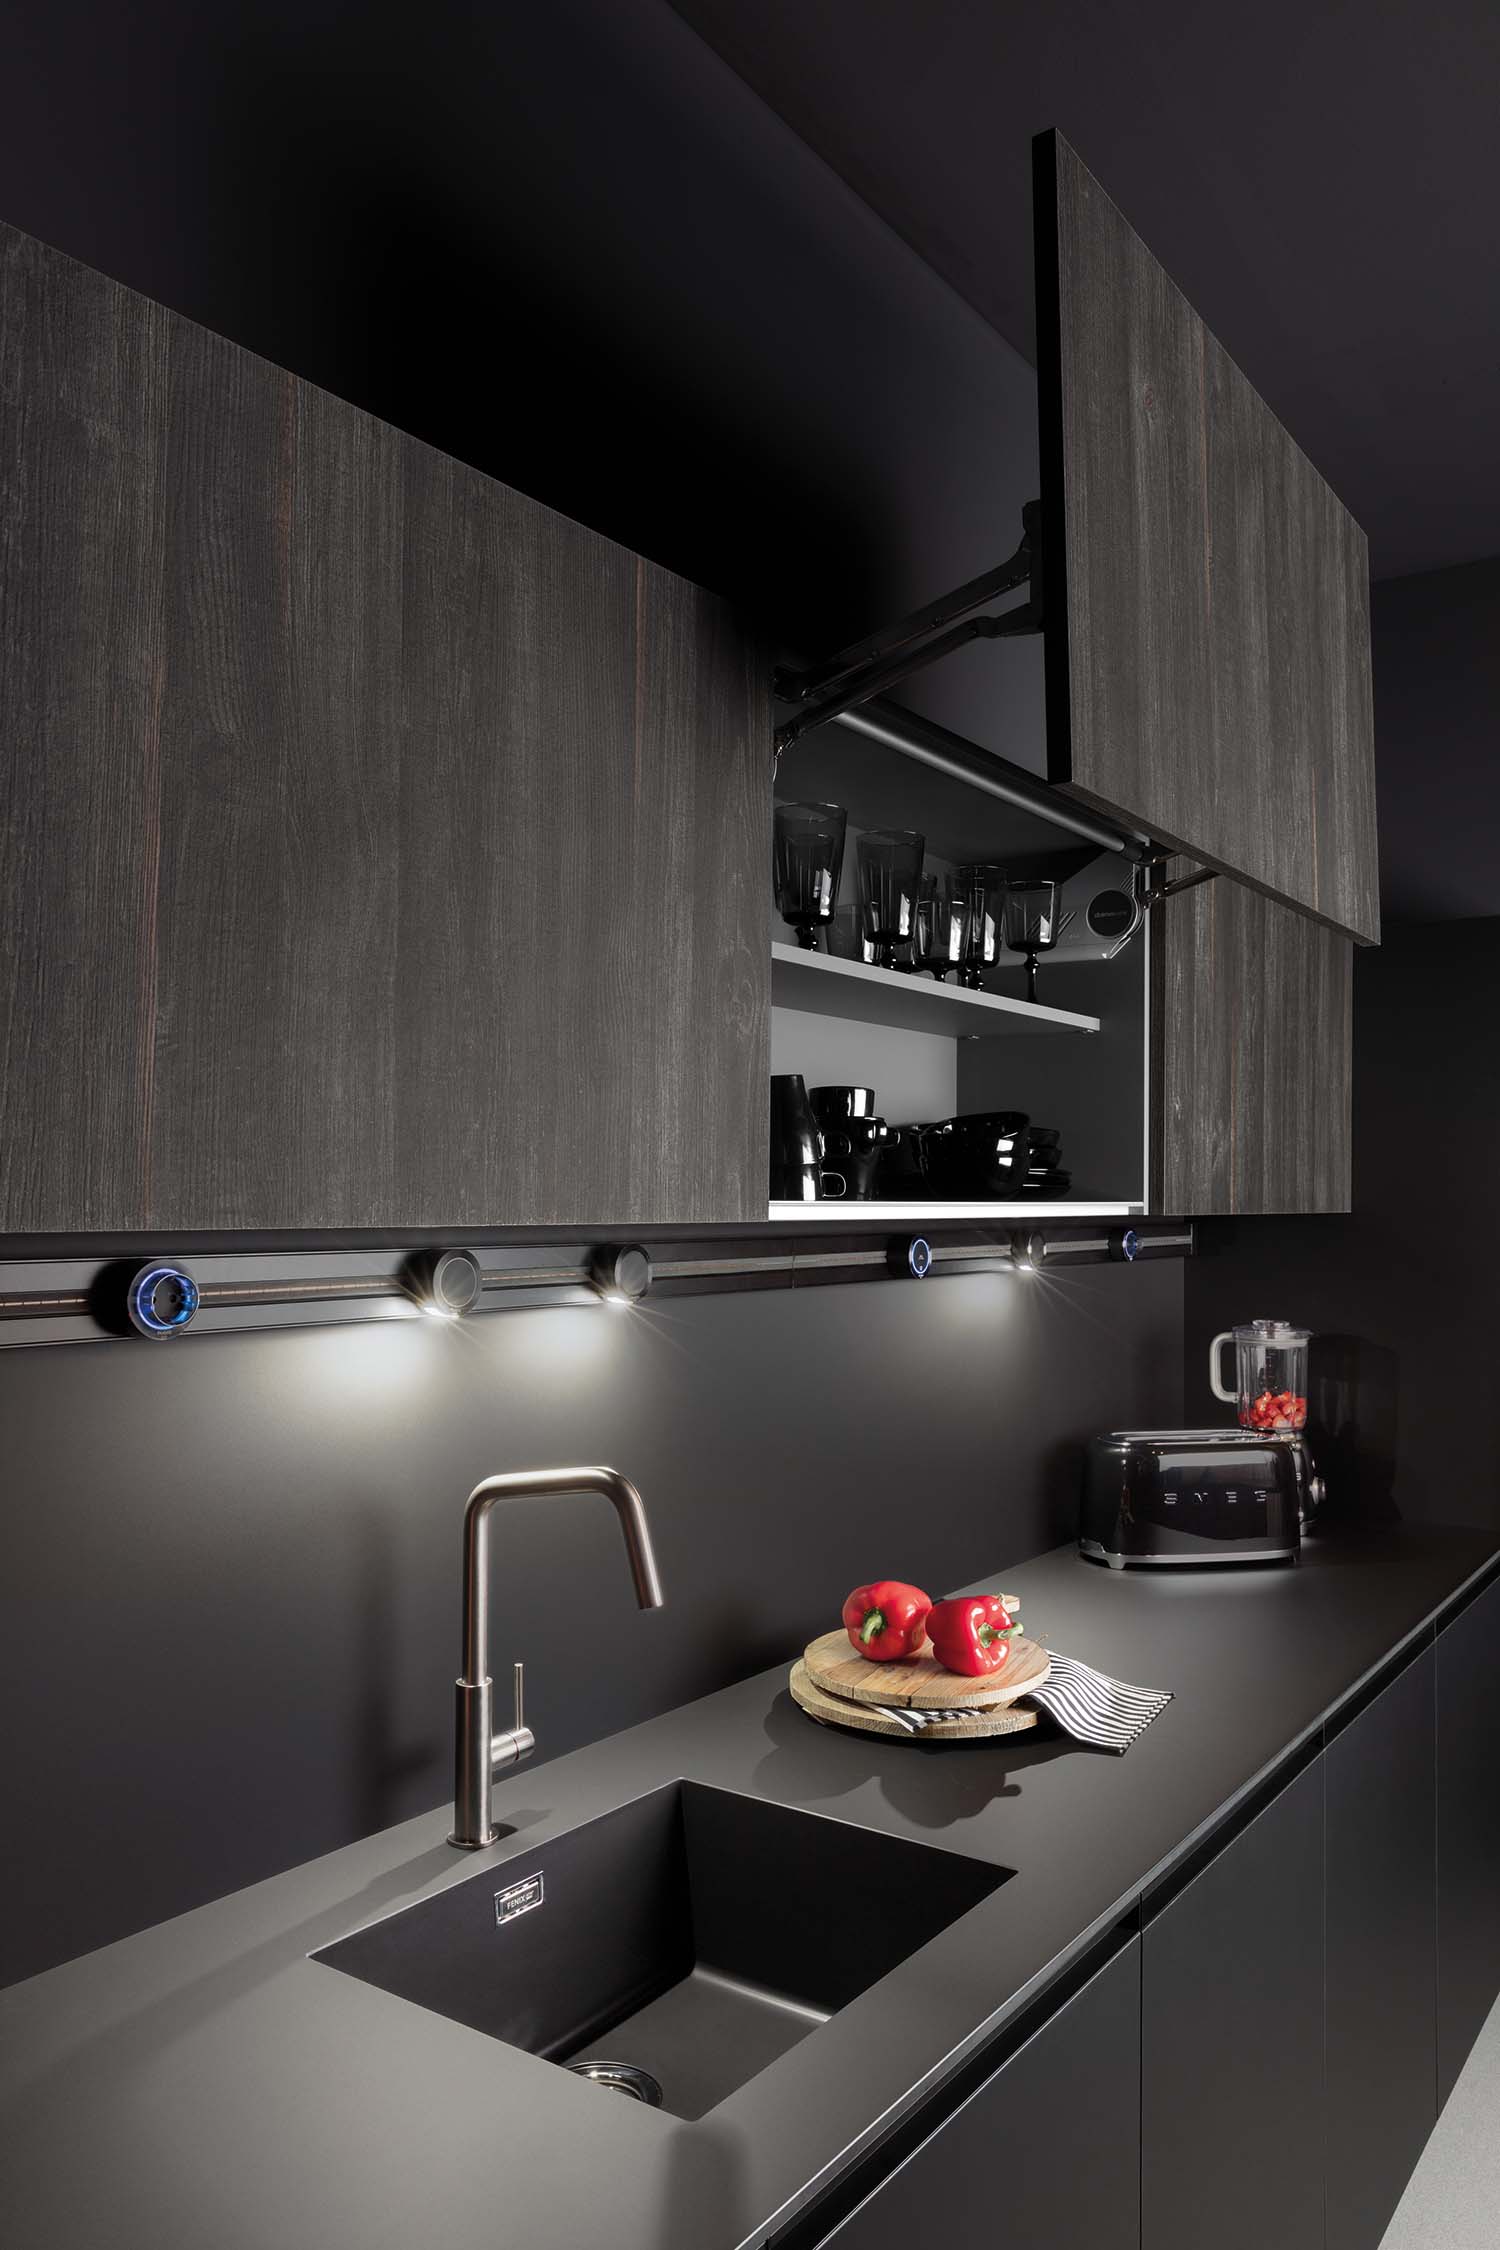 Vertically lifting push-pull operated kitchen wall units, finished in elegant dark wood veneer.